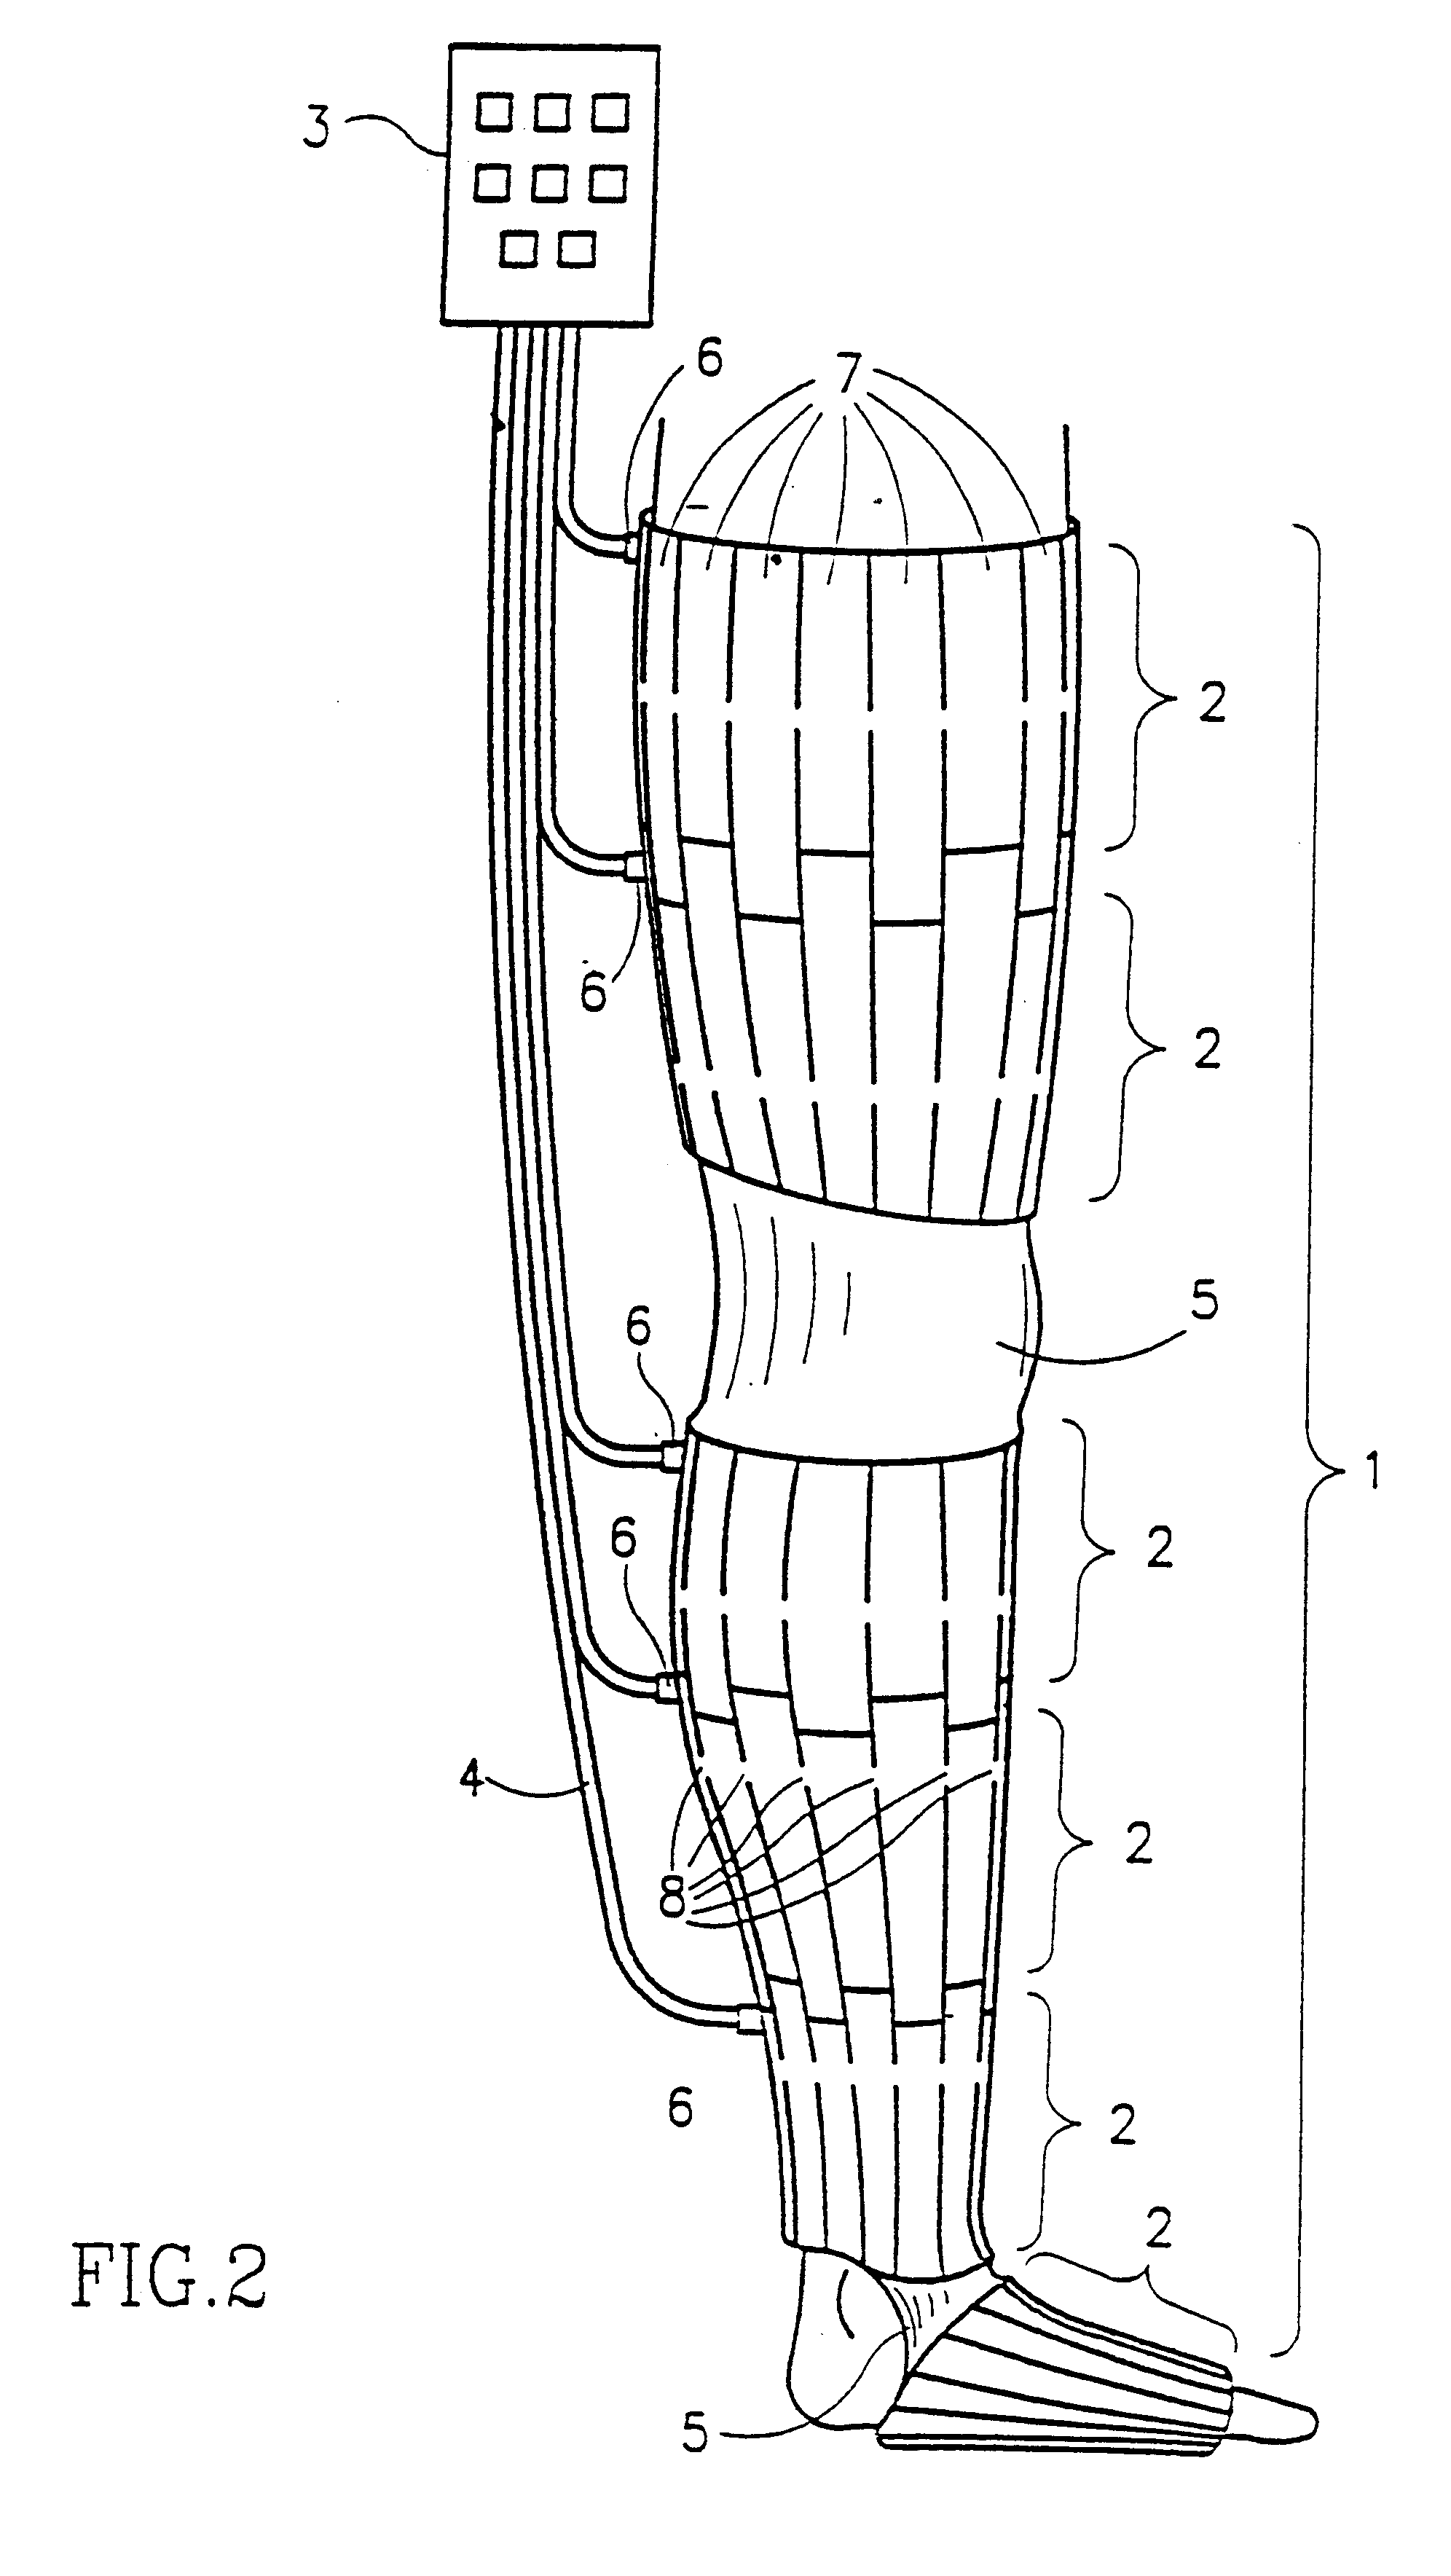 Device for pressurizing limbs